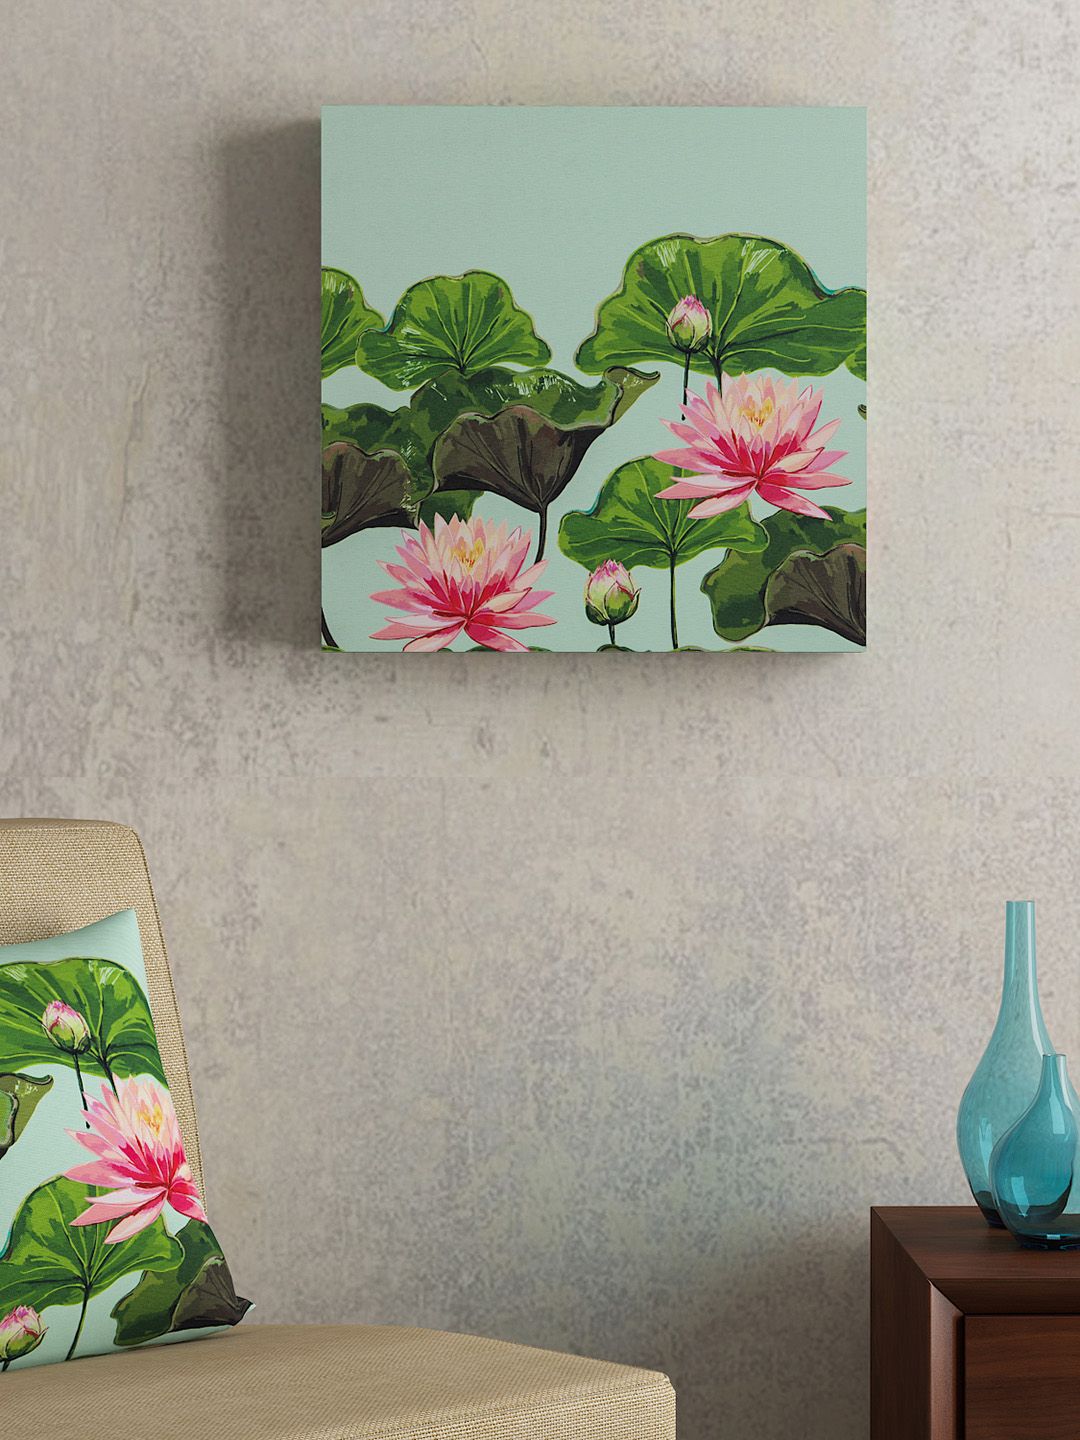 SEJ by Nisha Gupta Green & Pink Framed Wall Painting Price in India